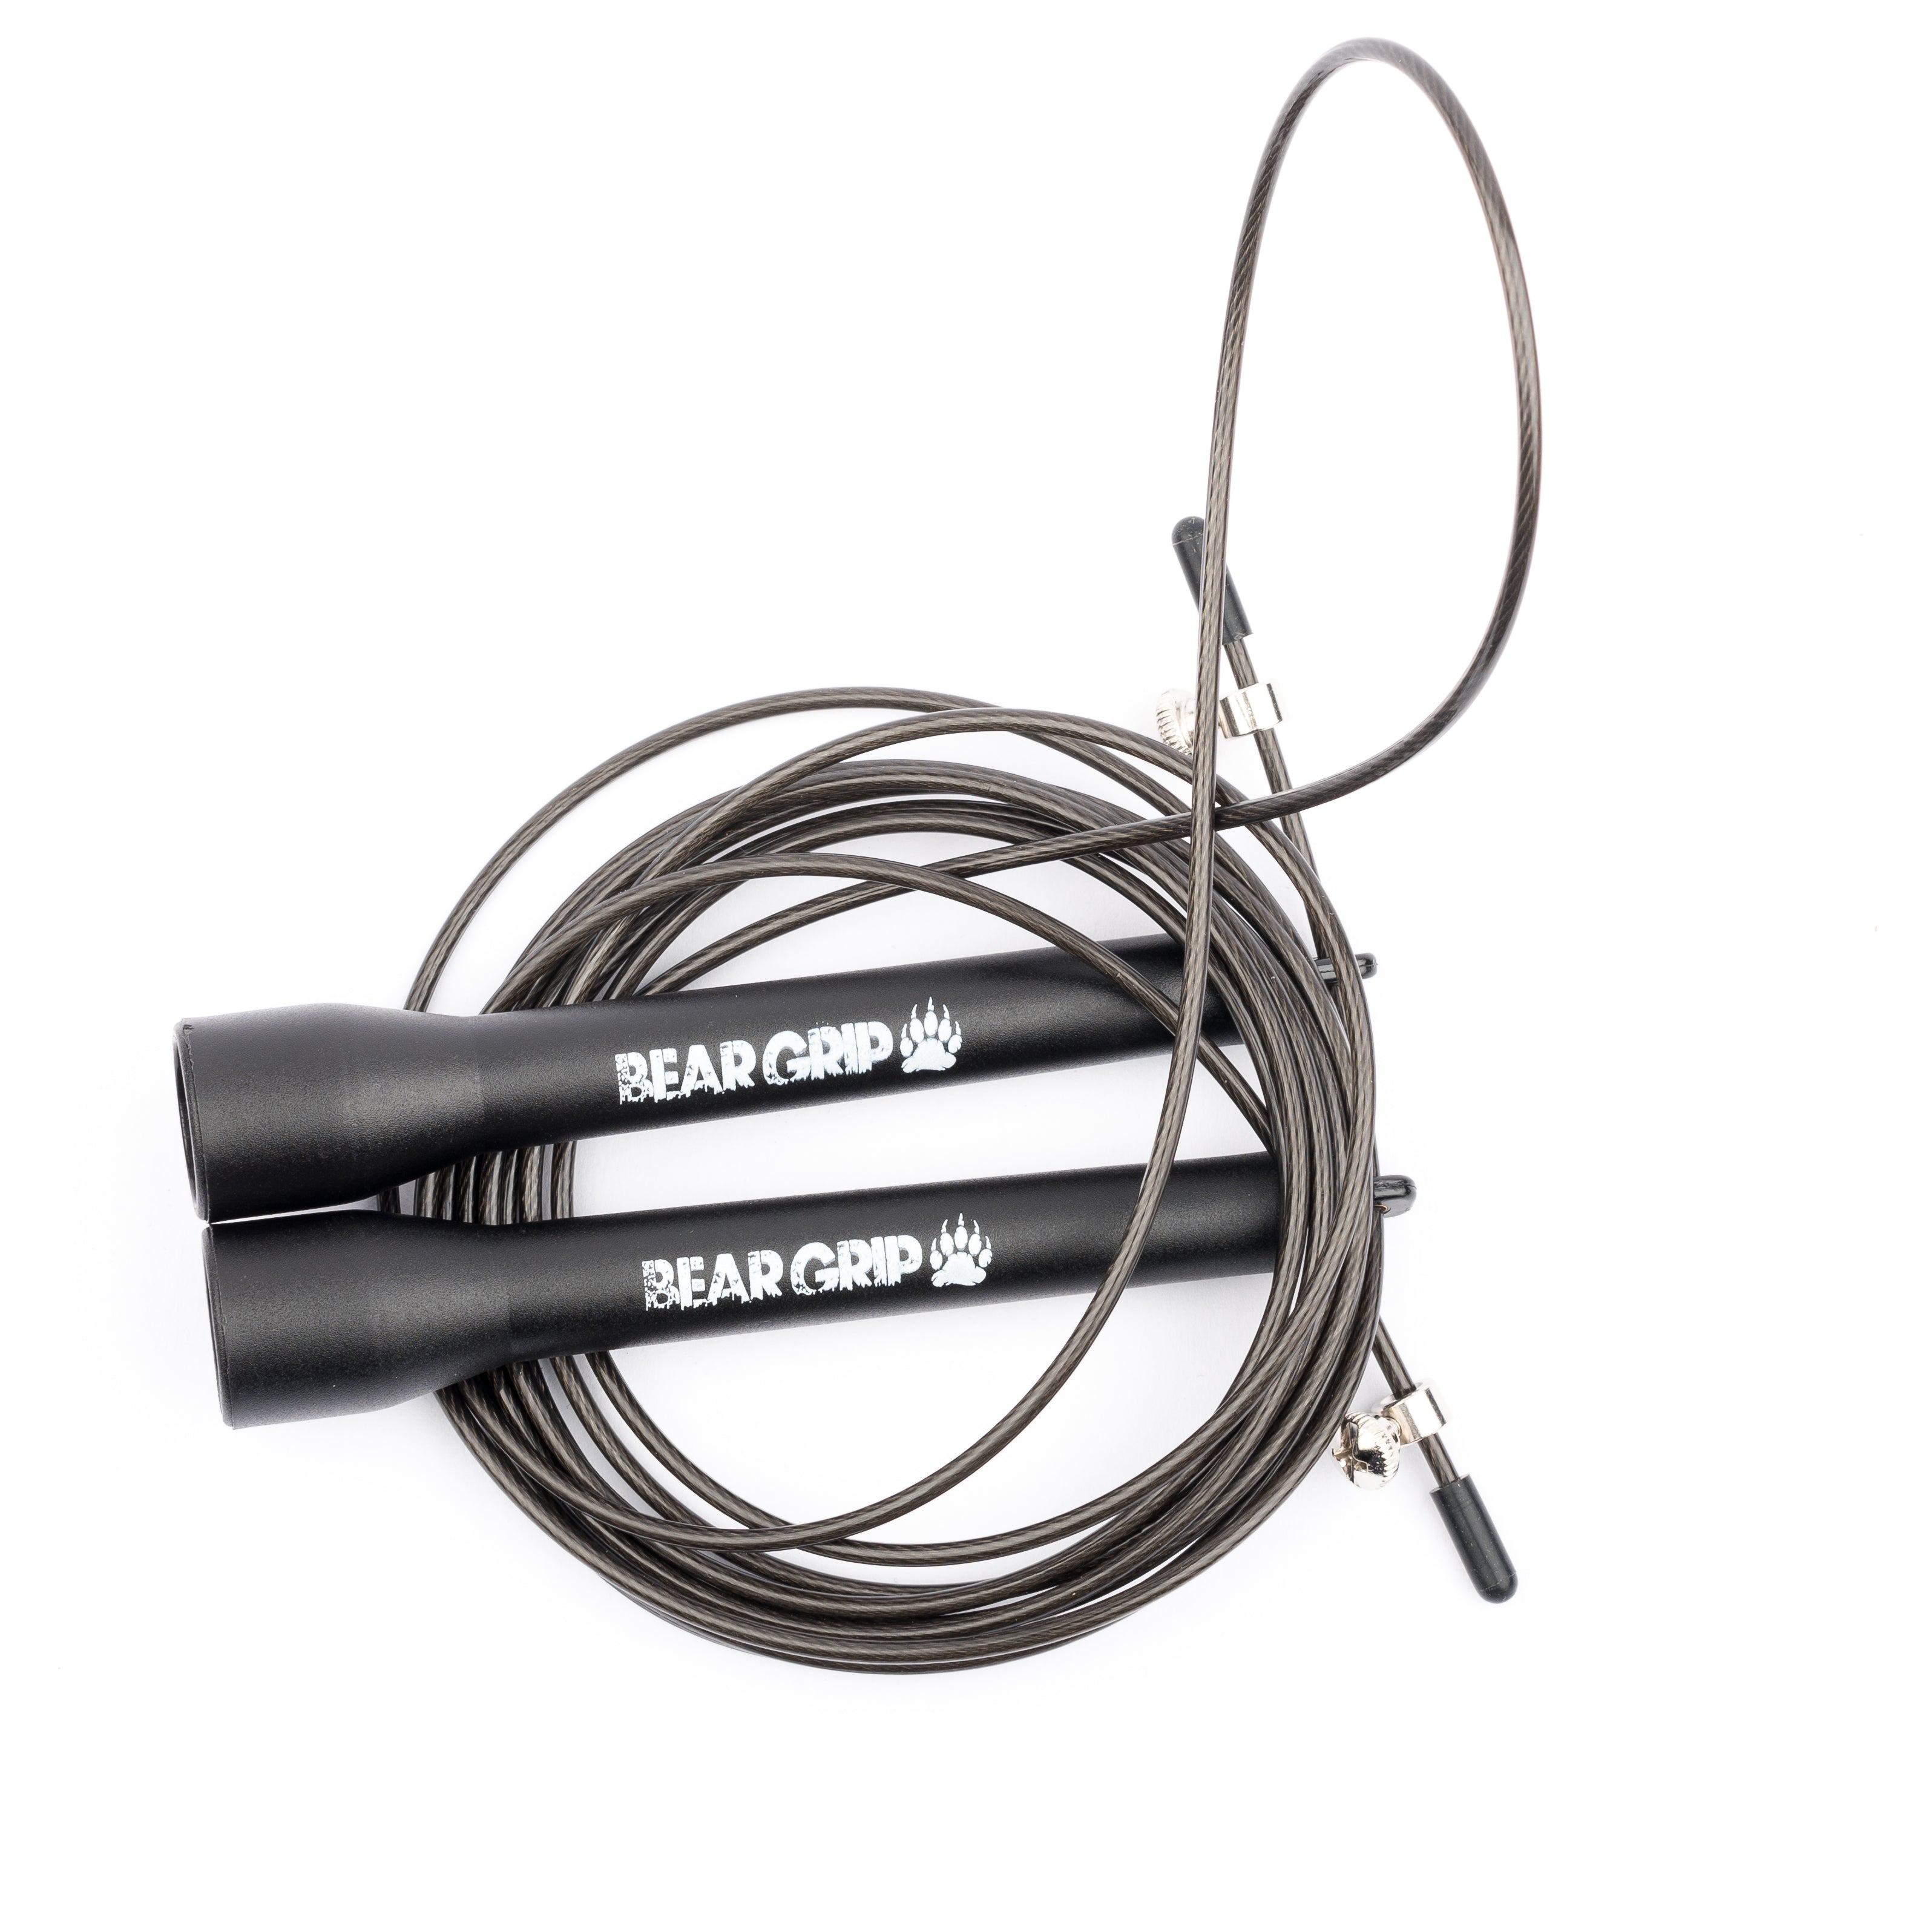 Bear Grip - Best Skipping Speed Jump Rope, Adjustable 10ft Cable, ( STEEL BALL-BEARING mechanism) For Cardio, Boxing, MMA, Crossfit with FREE GYM GEAR BAG - MONEY BACK GUARANTEE.